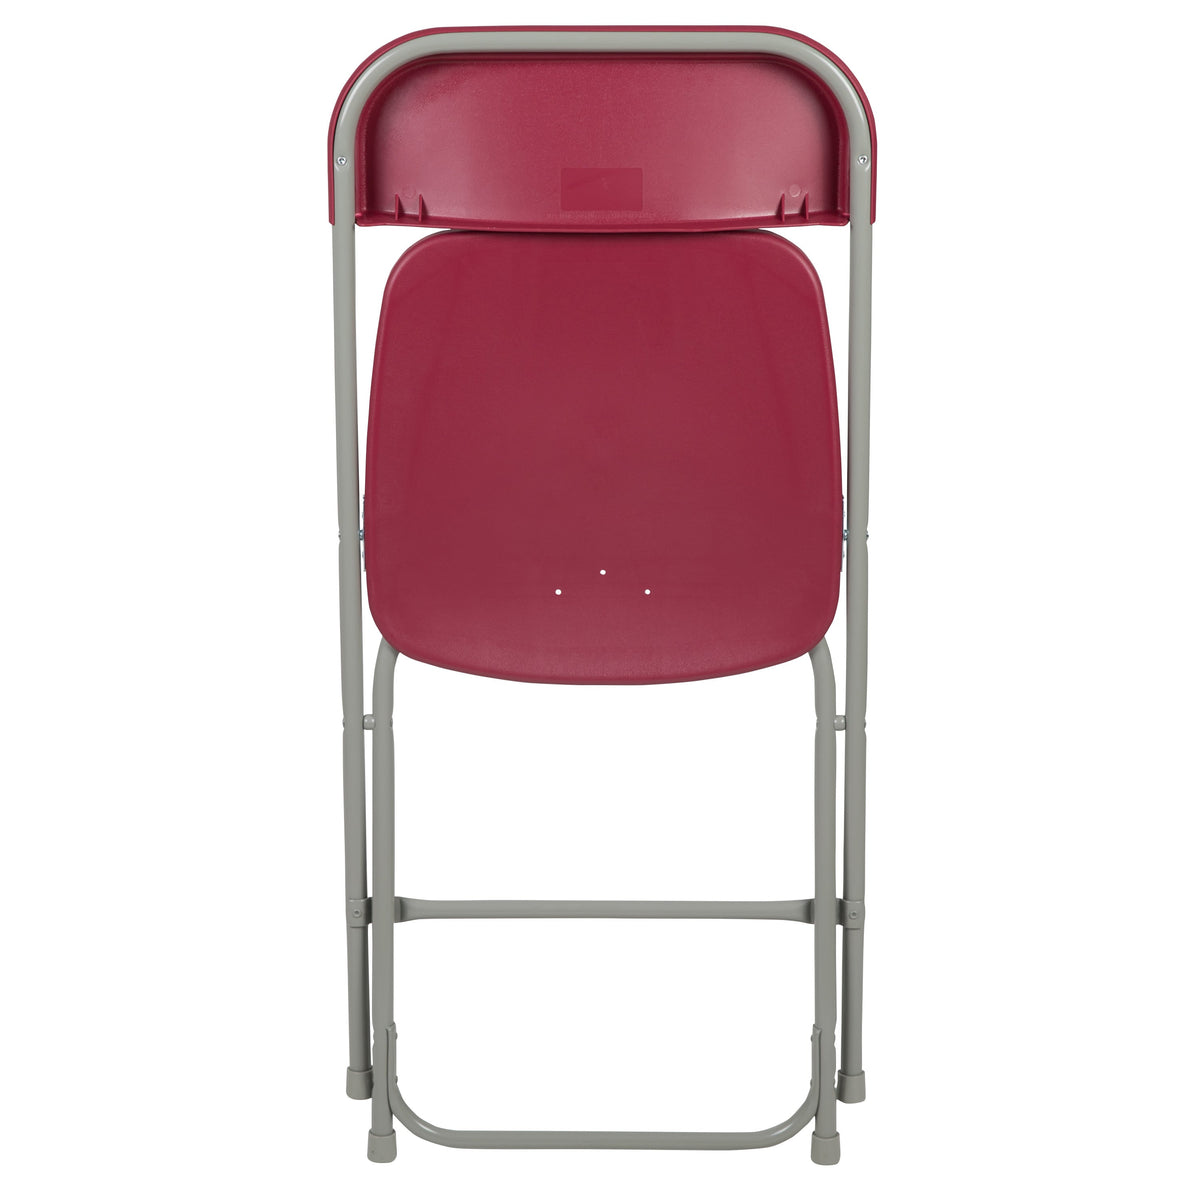 Red |#| Folding Chair - Red Plastic – 650LB Weight Capacity - Event Chair